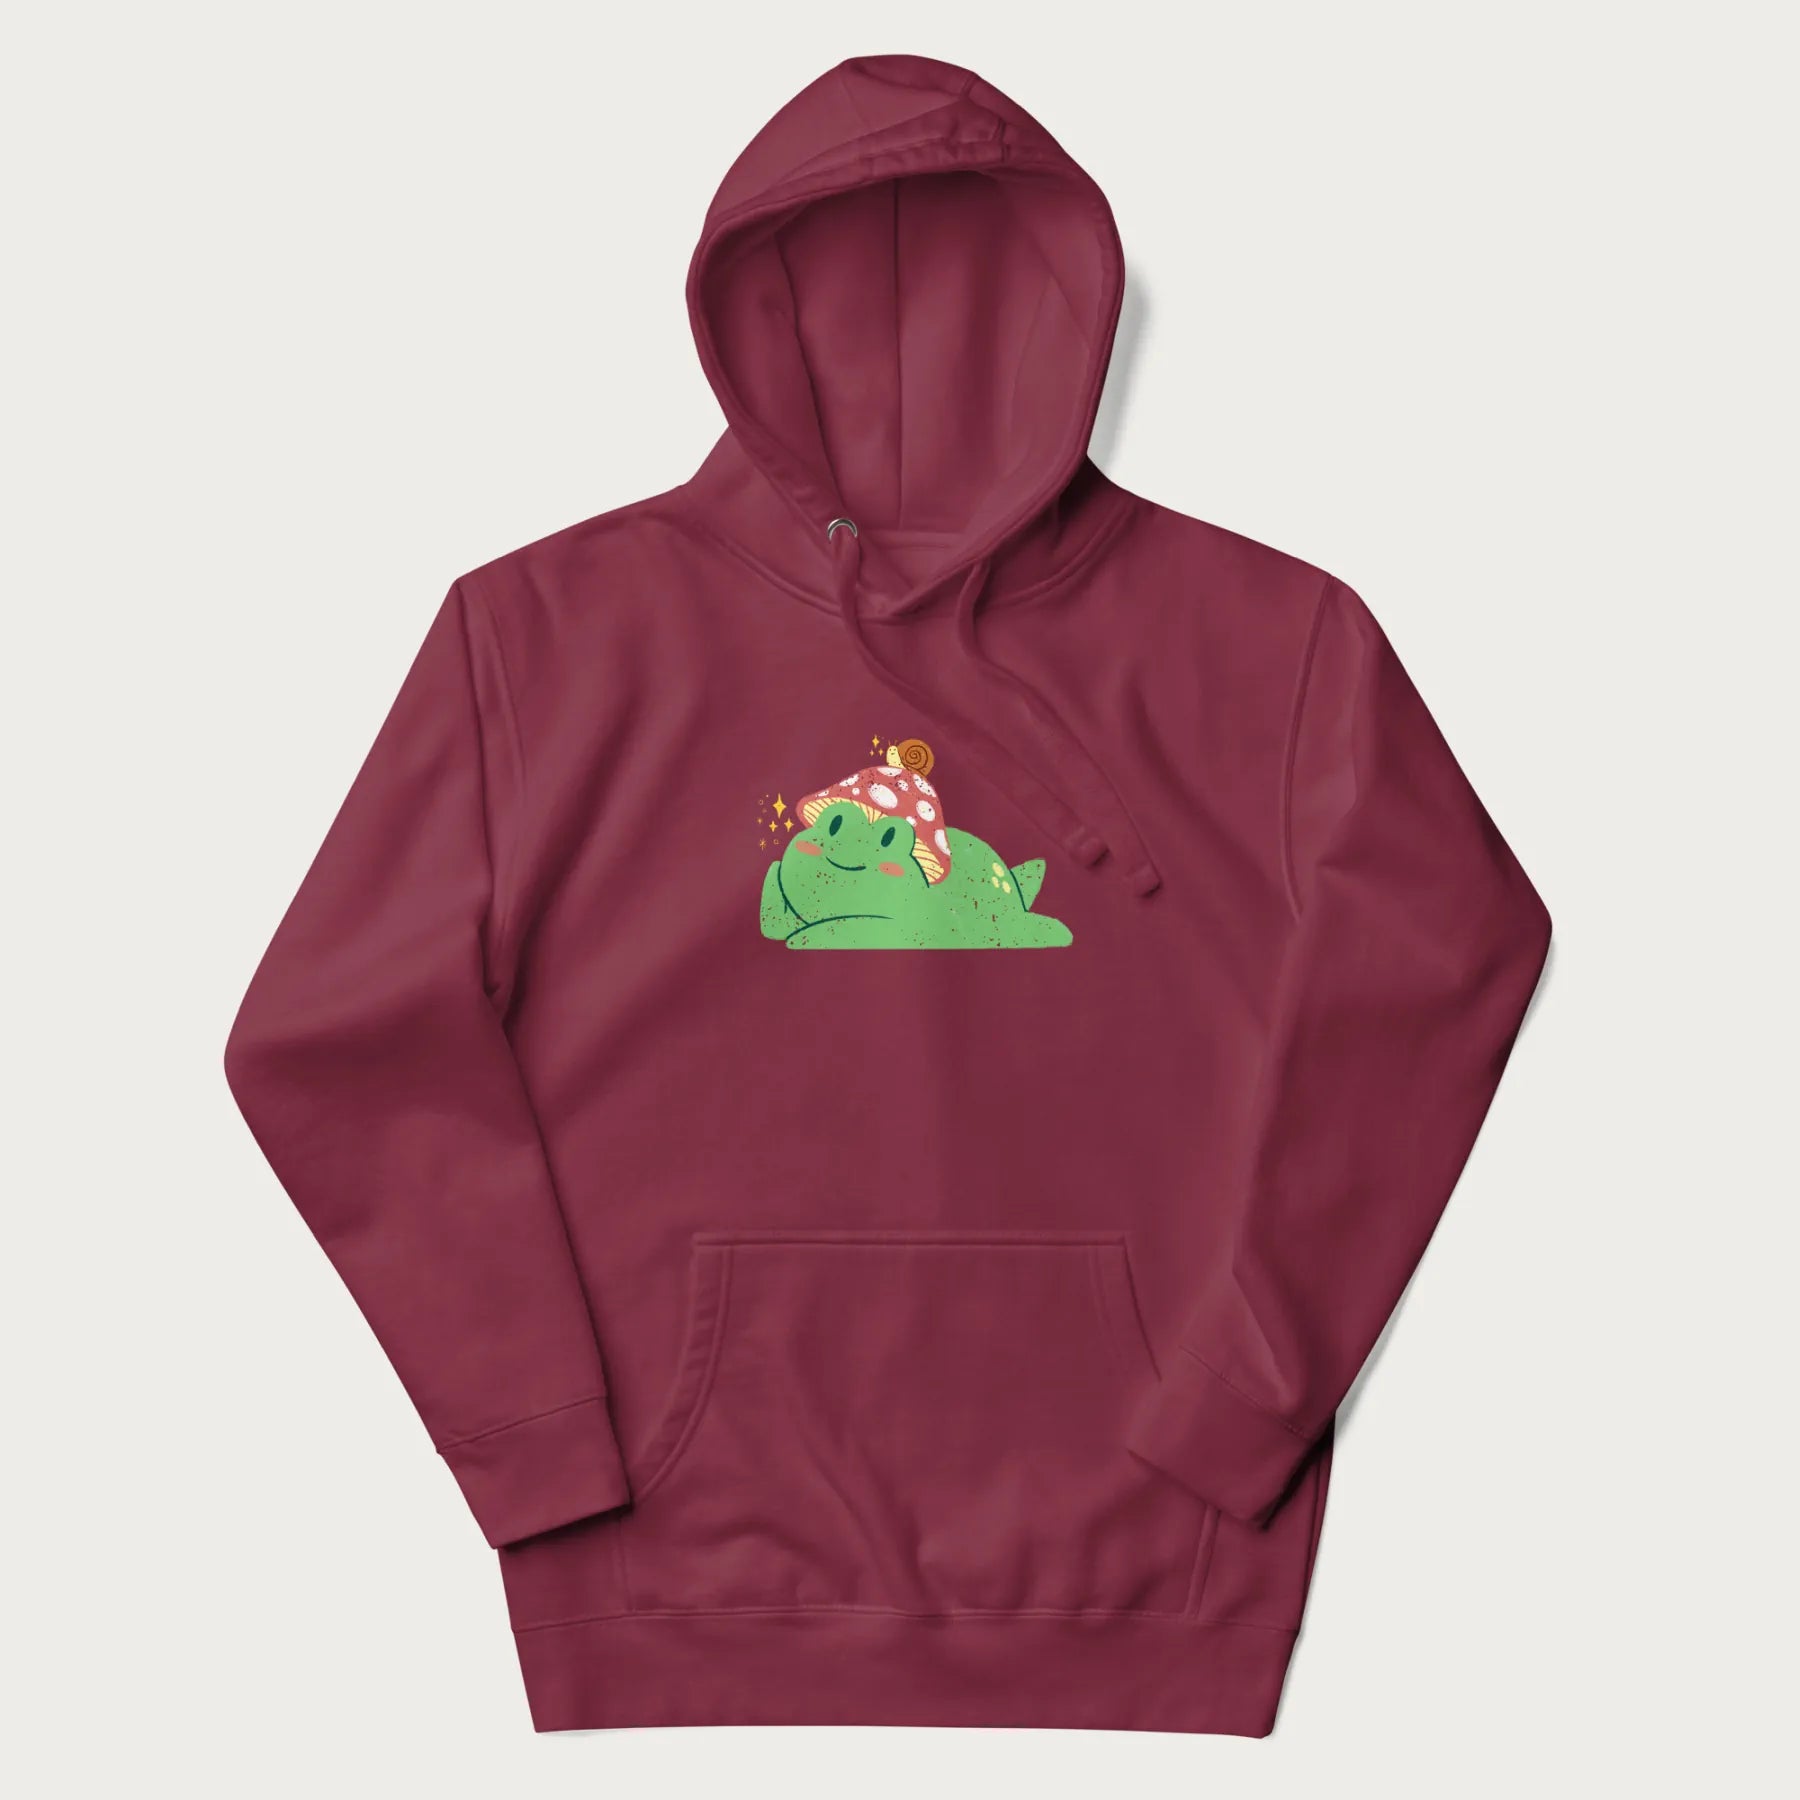 Maroon hoodie with a cottagecore design of a green frog wearing a mushroom cap and a snail on top.